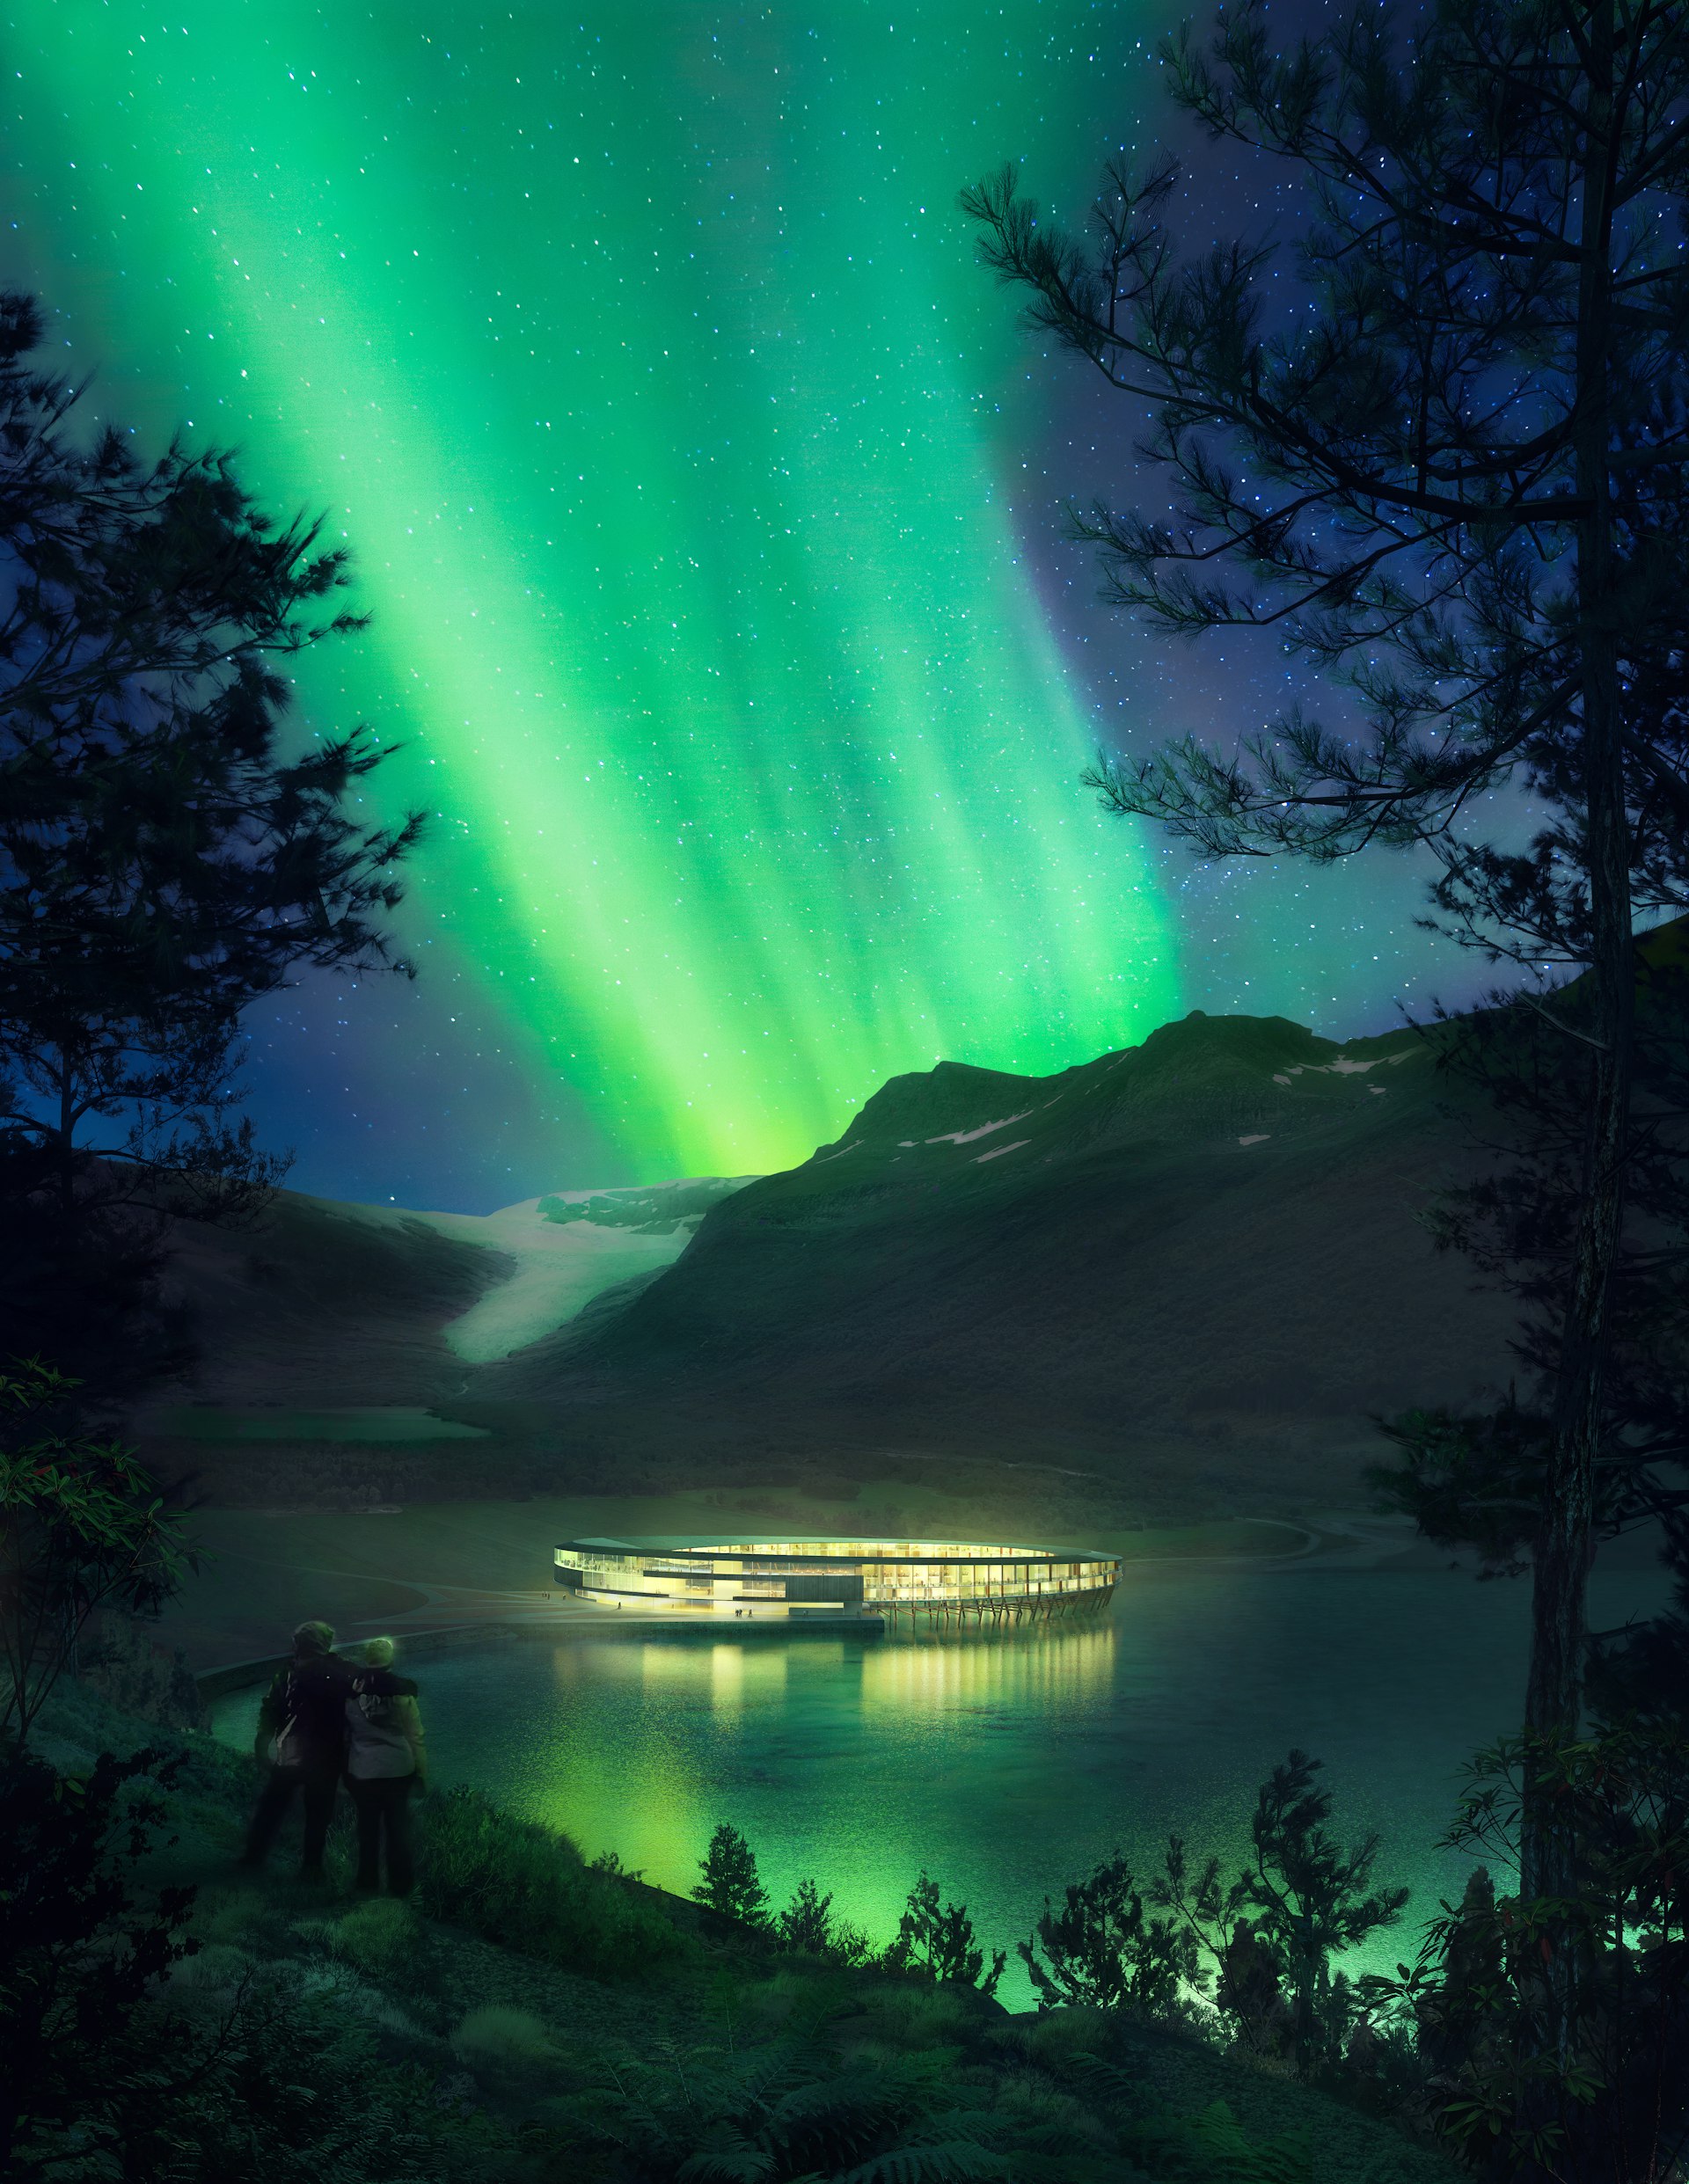 The Northern Lights as seen from the new Svart hotel in Meløy, Norway